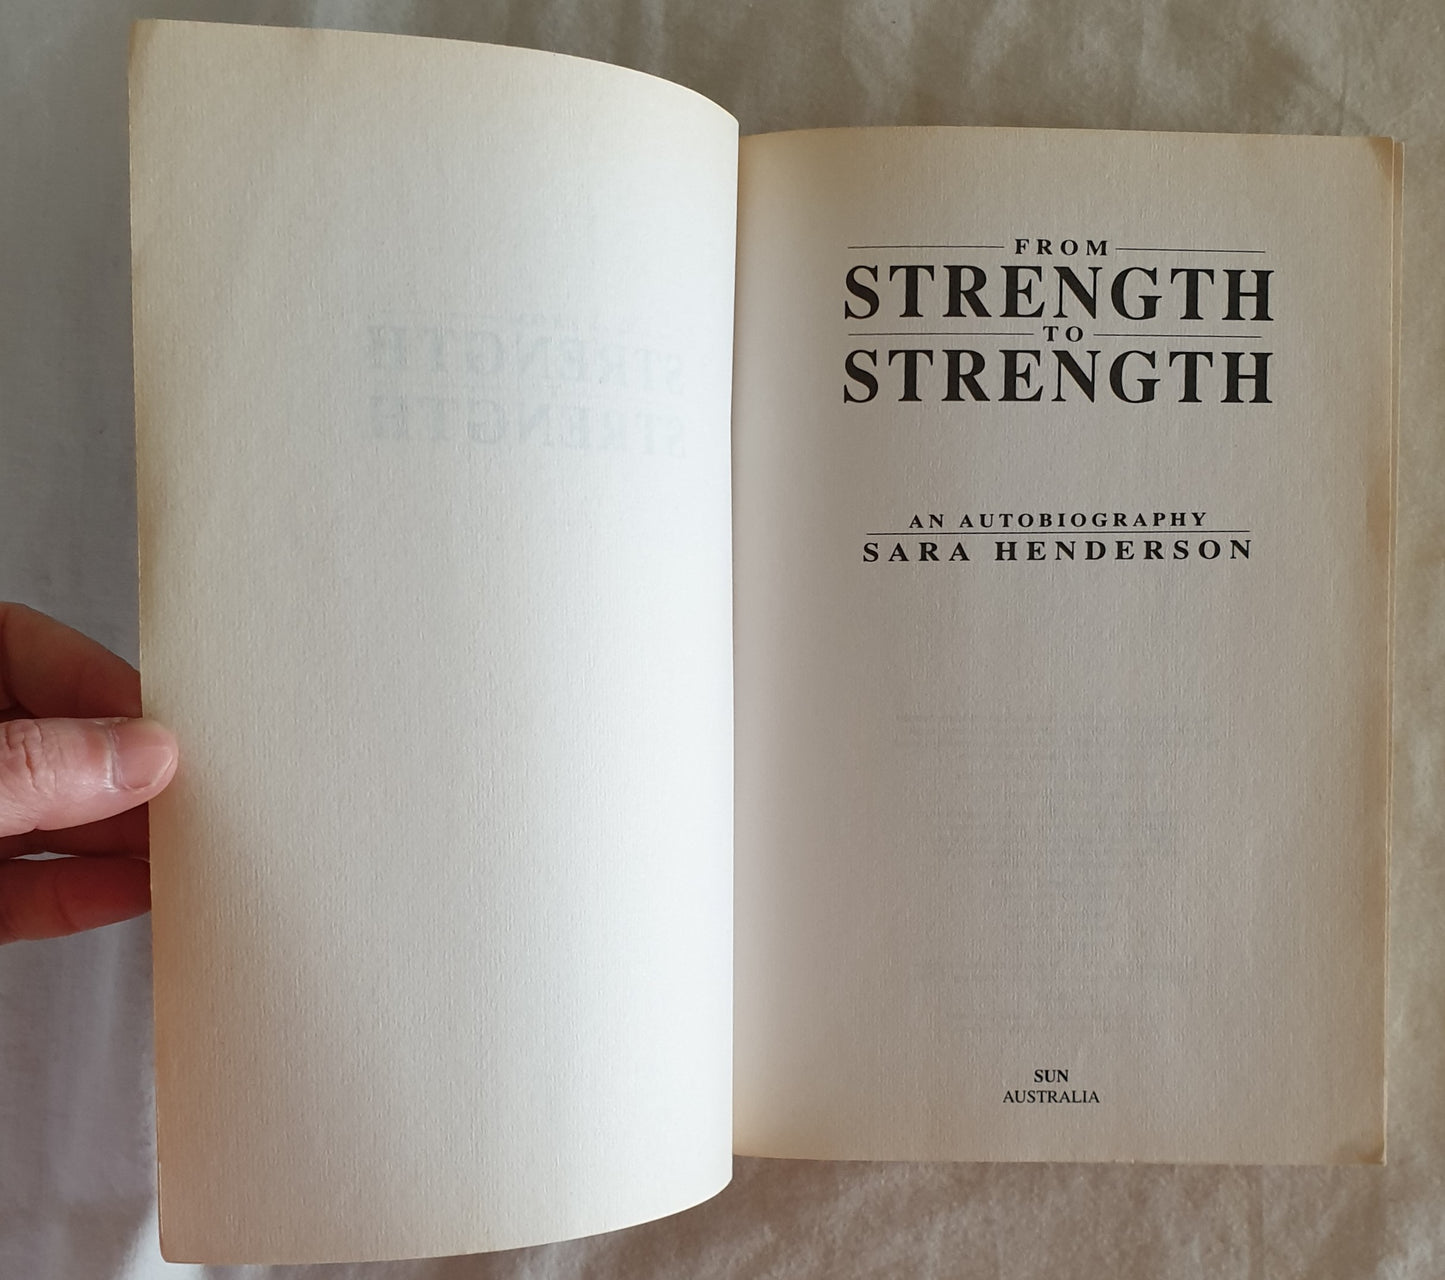 From Strength to Strength by Sara Henderson